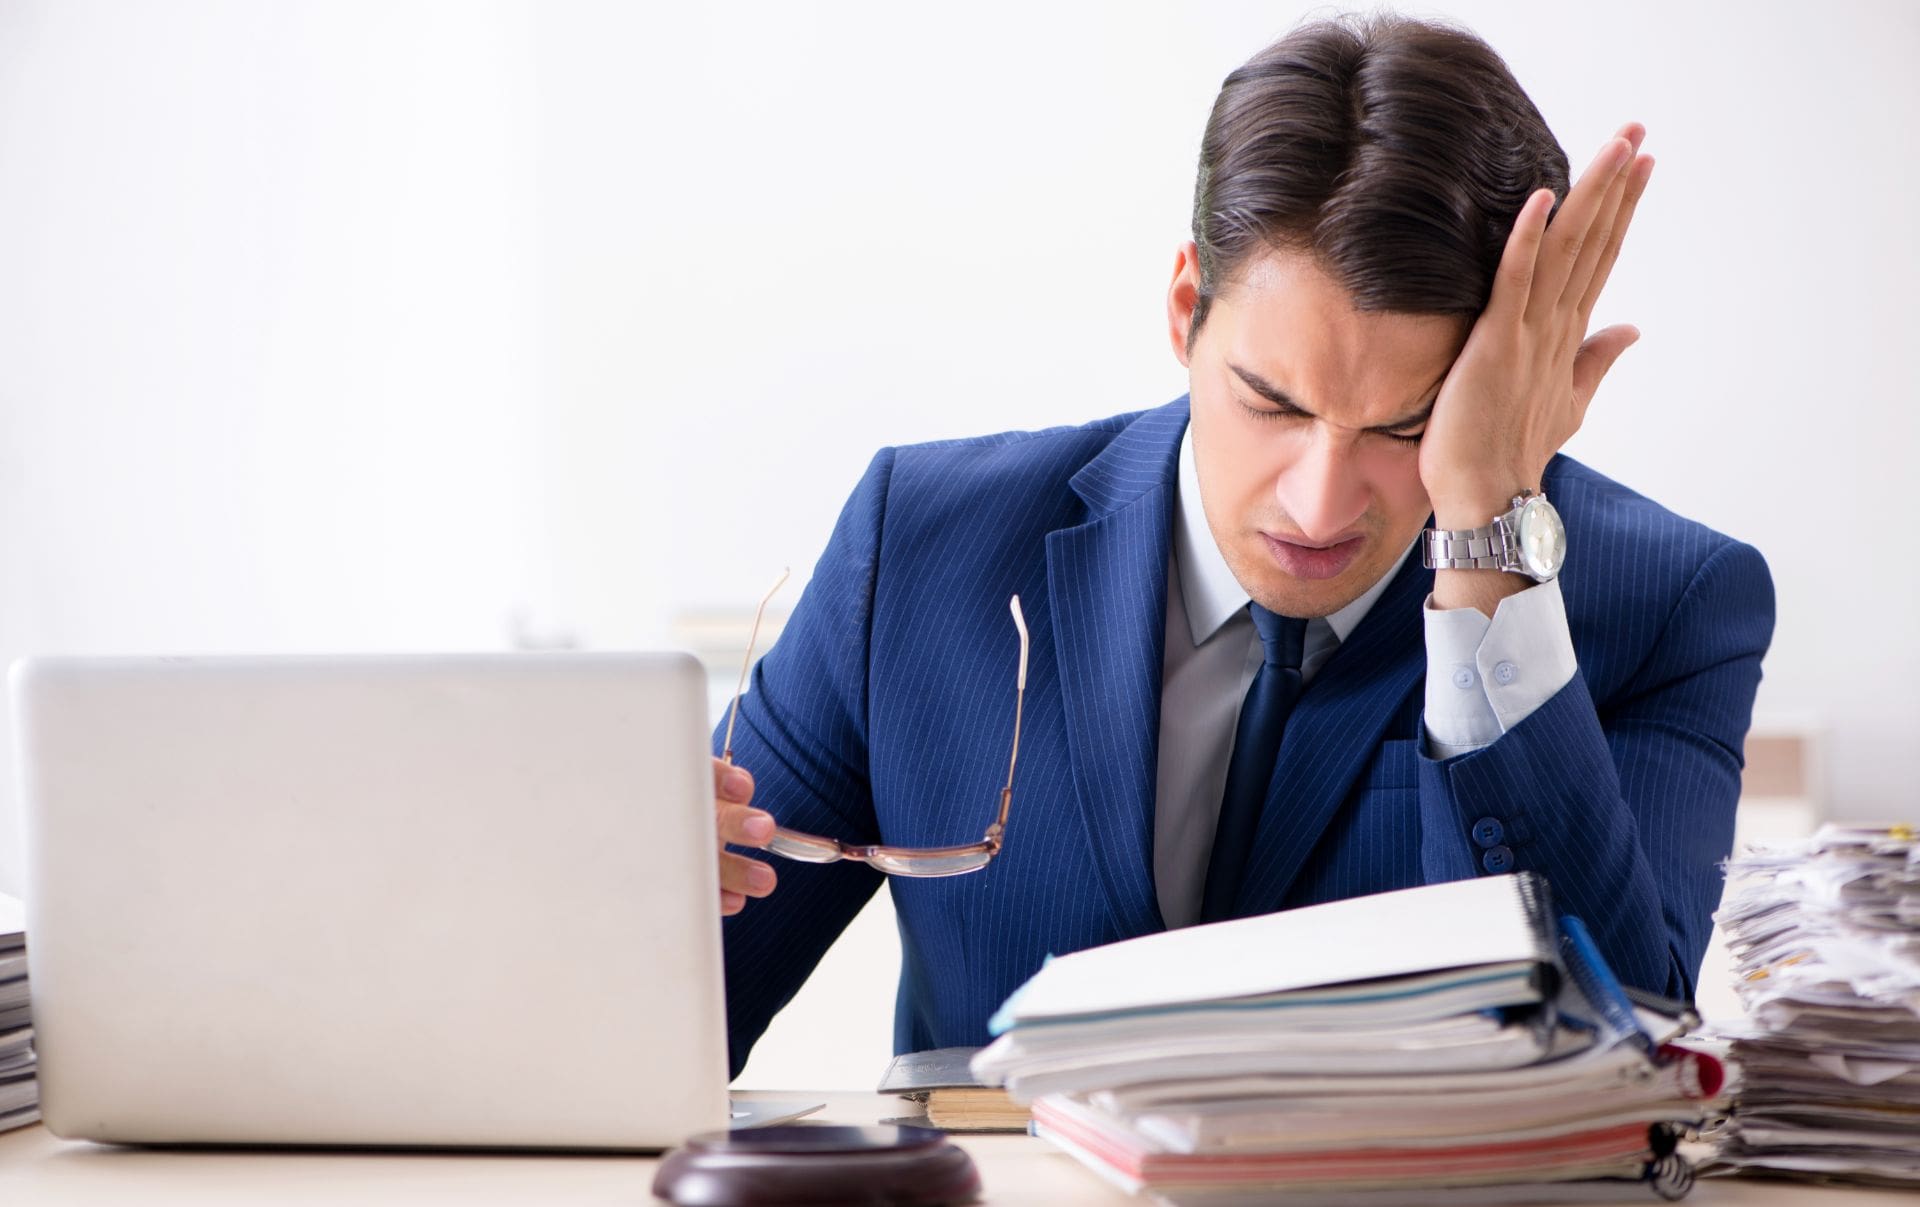 A business owner rubbing his head in frustration from the pile up of work on his desk next to his laptop wanting a easier way to navigate his workload and personal life. 